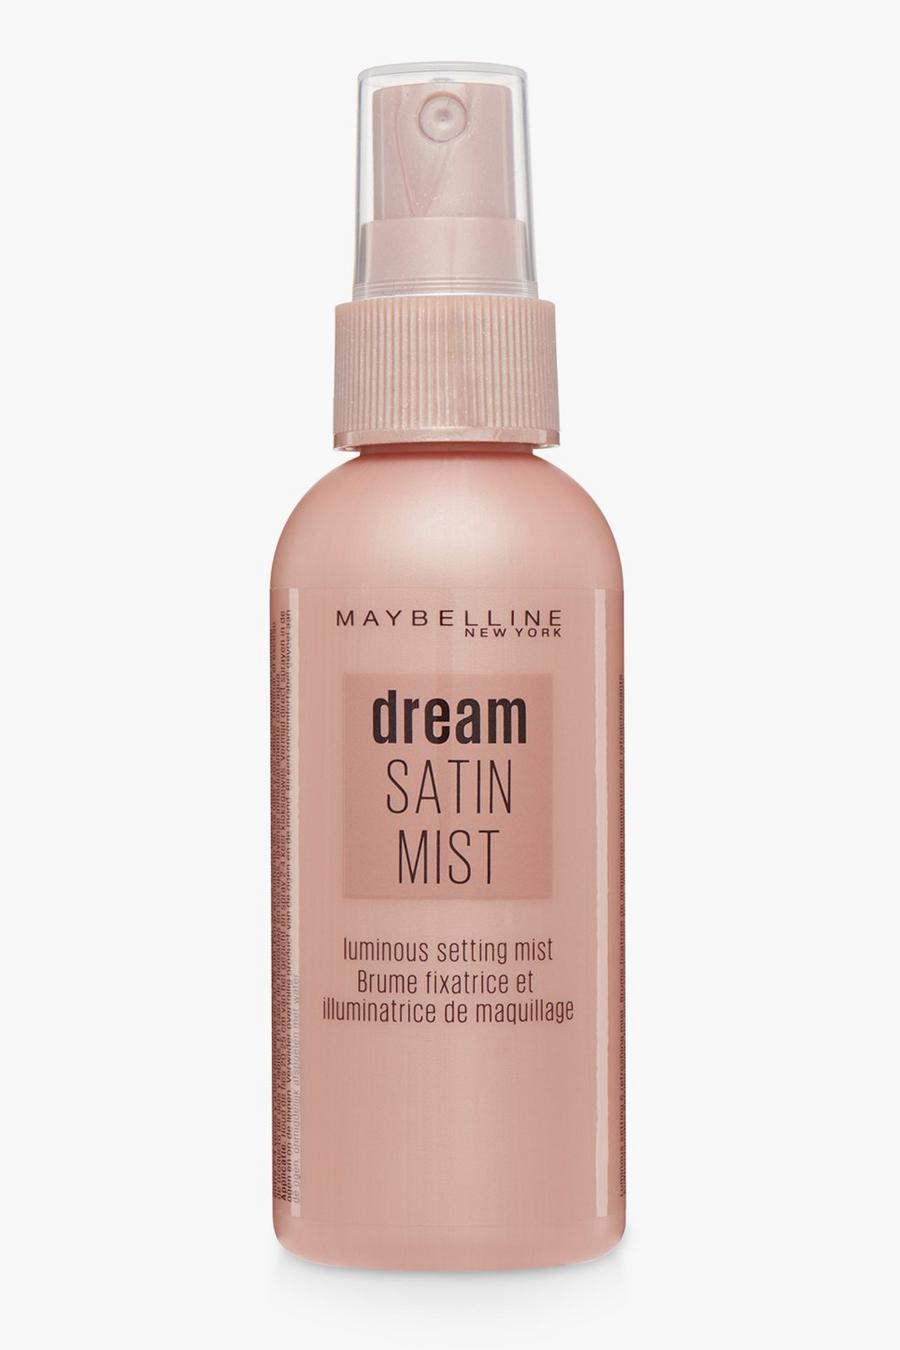 Clear Maybelline Dream Satin Mist Makeup Setting Spray with Luminous finish